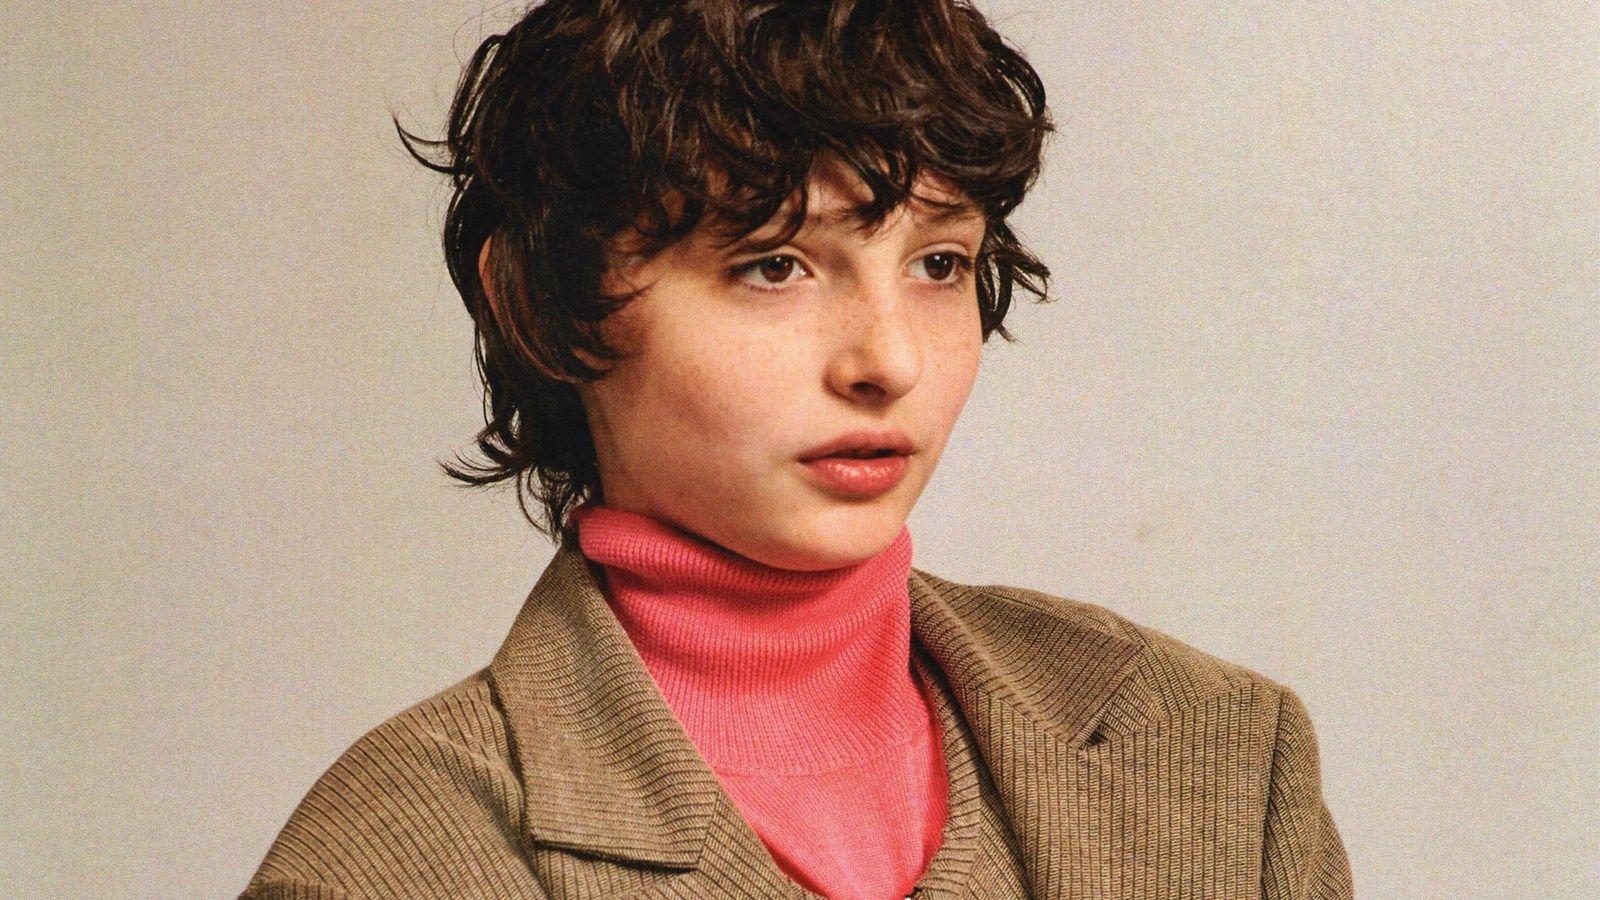 Download Finn Wolfhard wallpapers for mobile phone free Finn Wolfhard  HD pictures